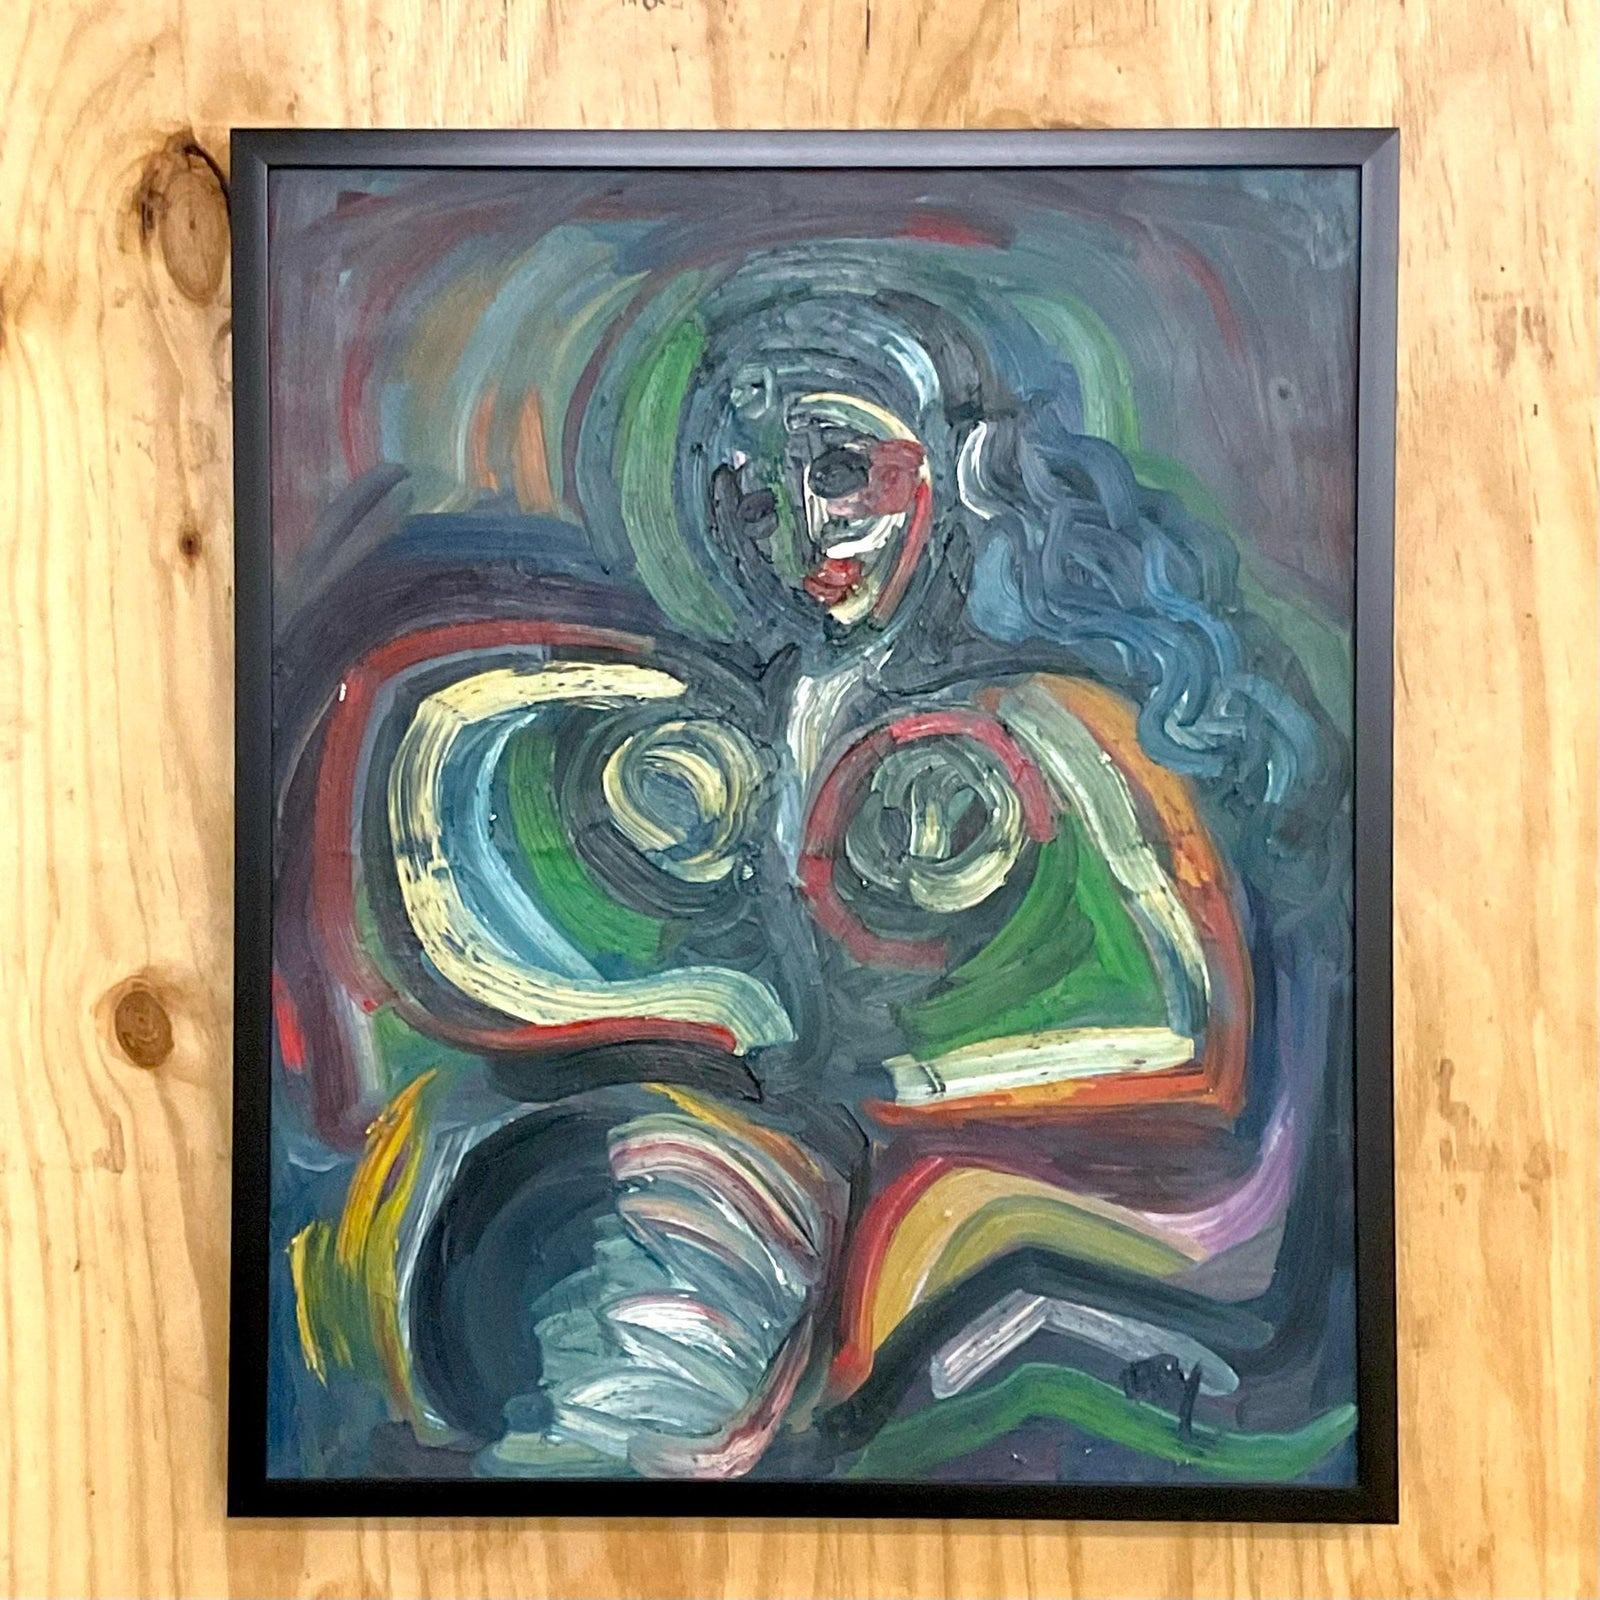 20th Century Vintage Boho Original Signed Oil Painting of Female Nude For Sale